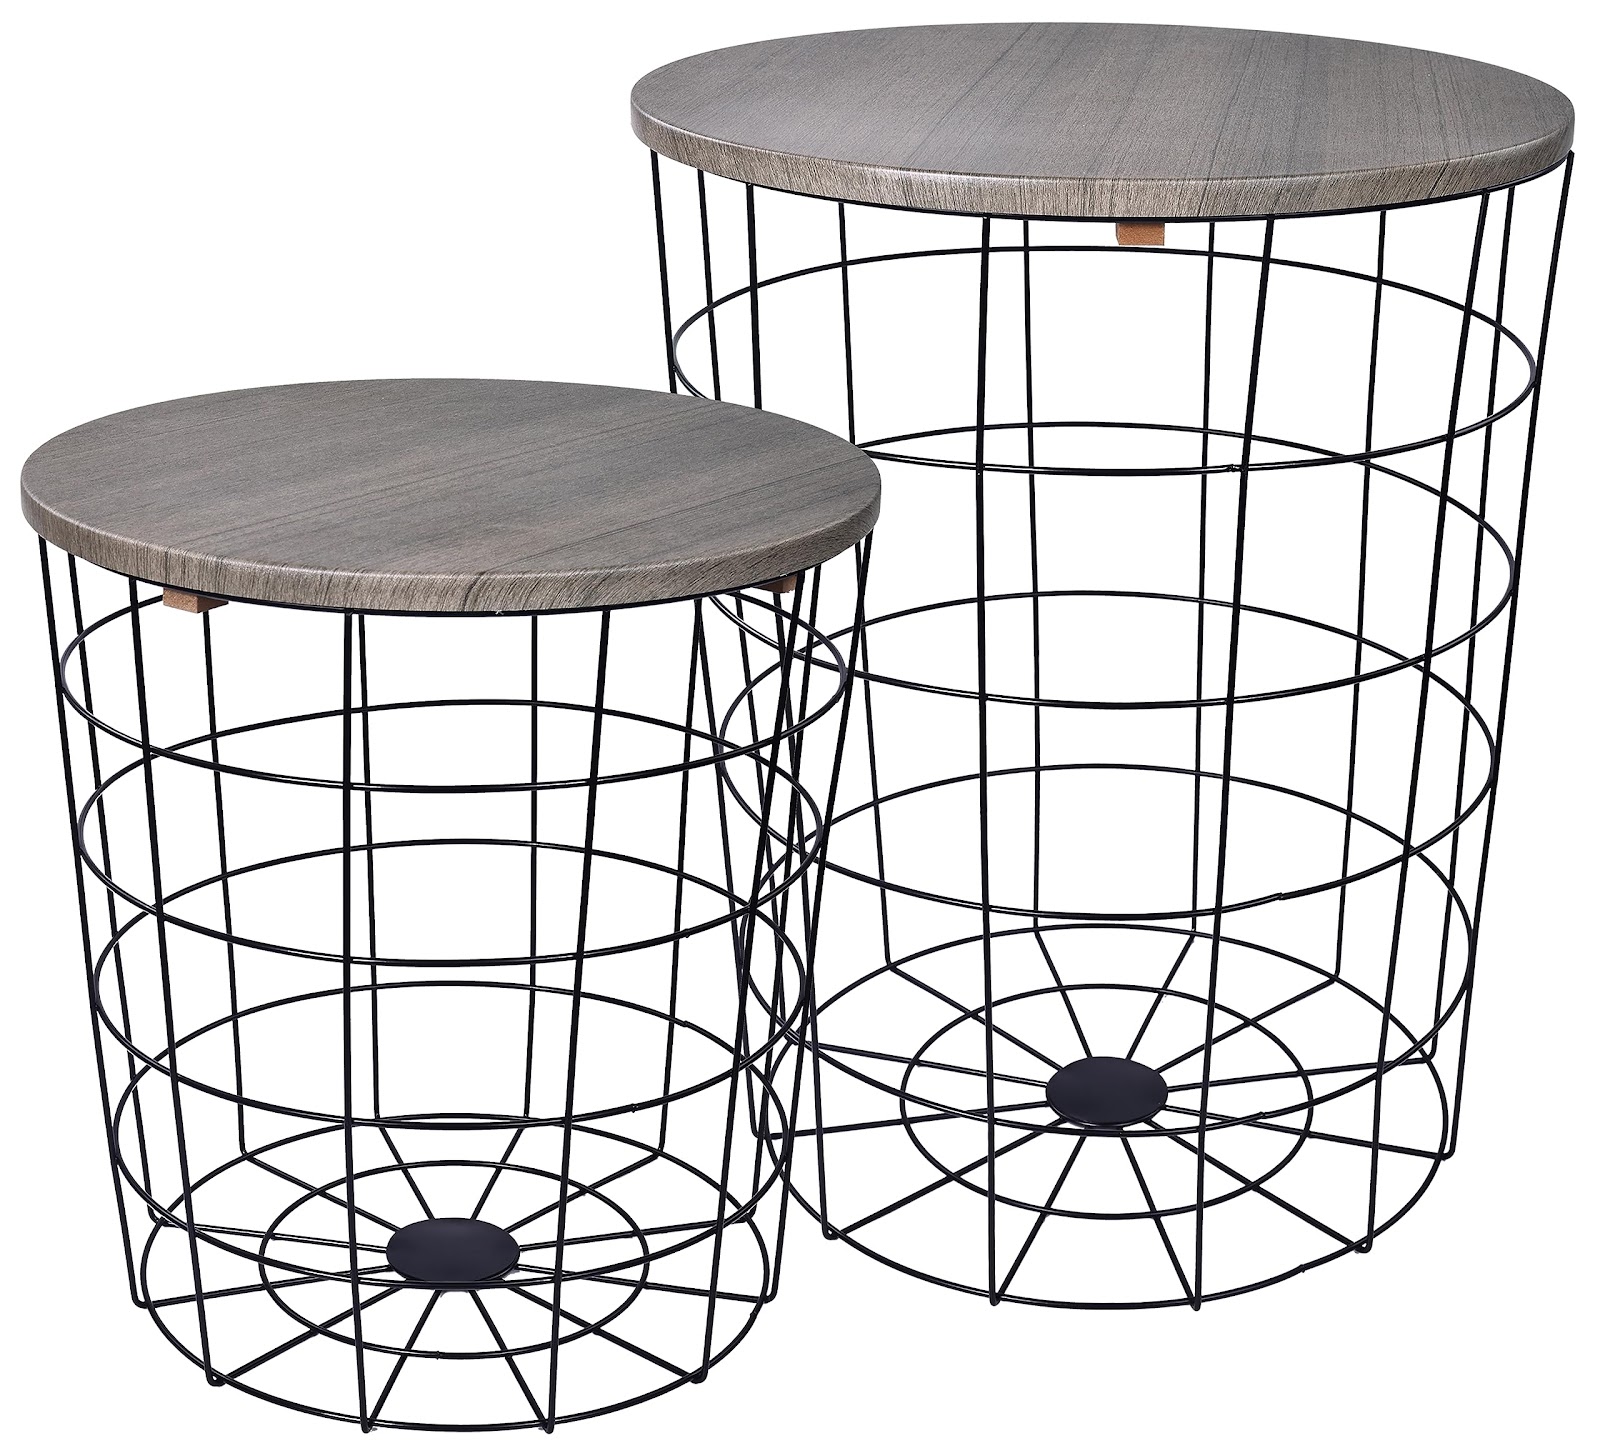 Elevon Nesting Table End Table Wire Basket Base with Wood Tops Side Table Set of 2, Gray